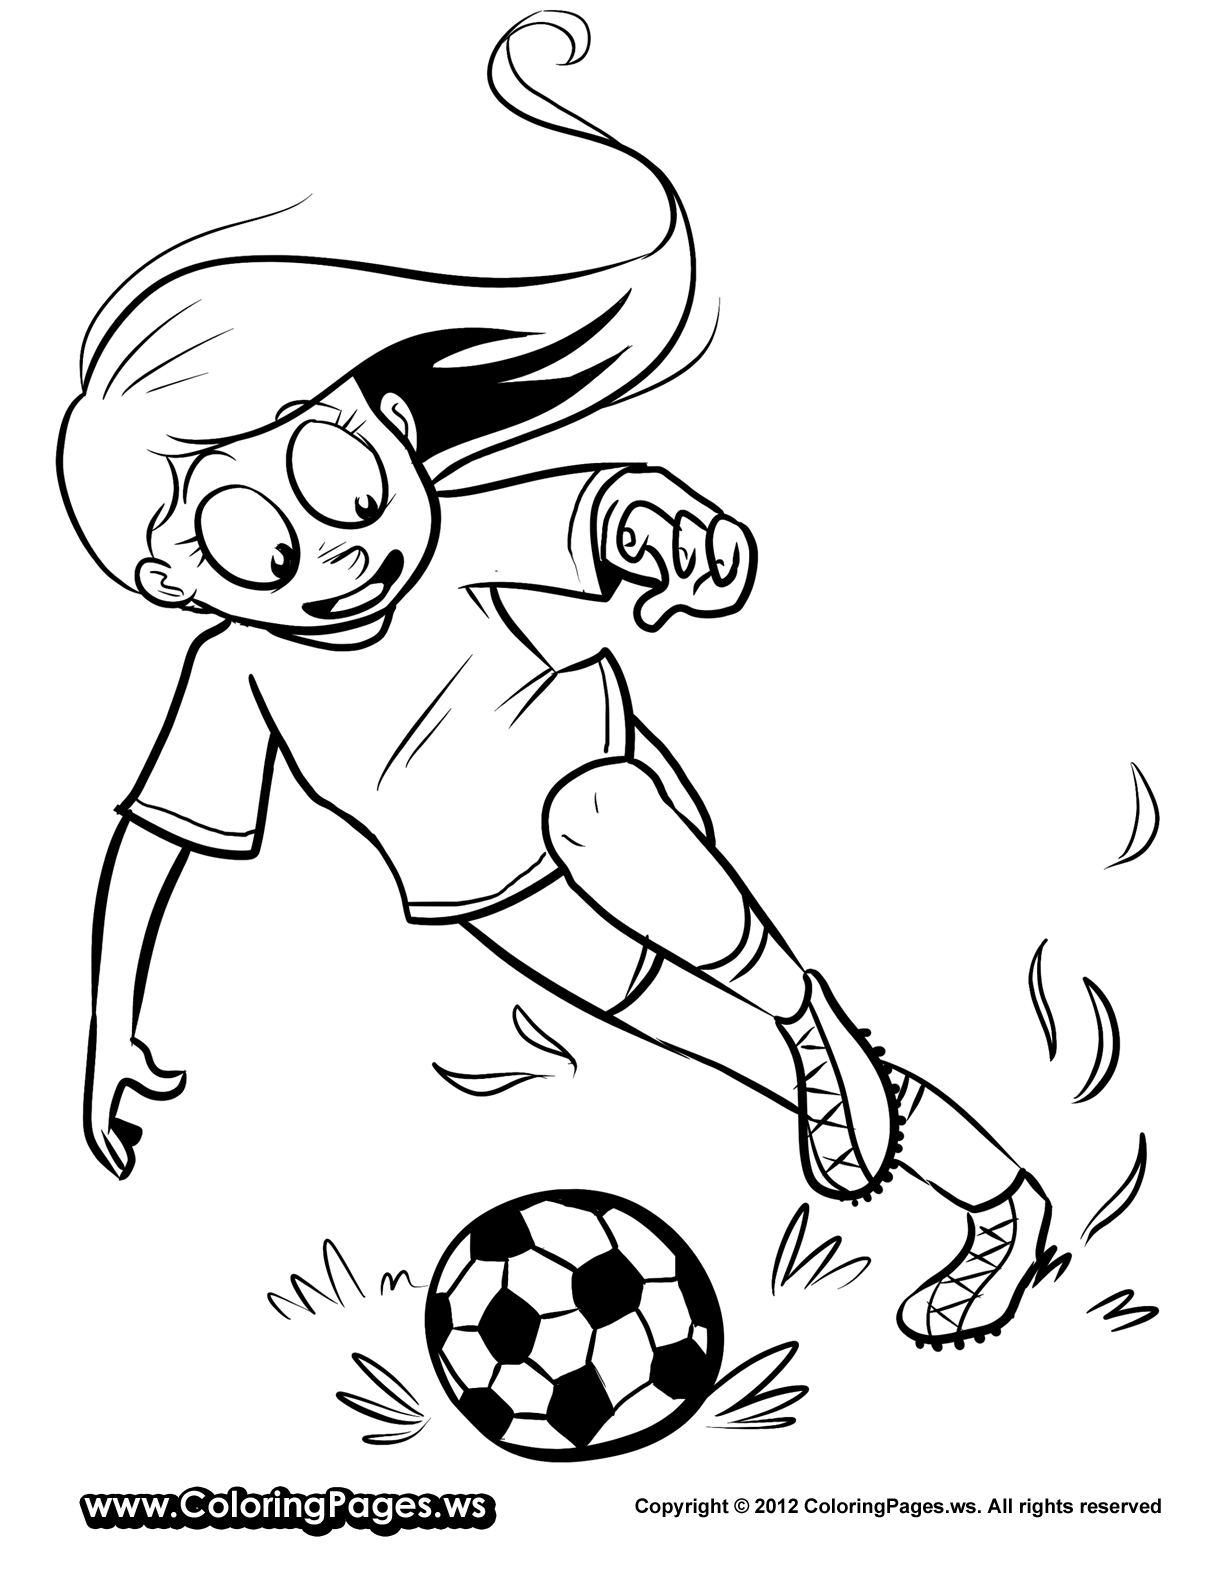 soccer player colouring pages soccer player coloring pages soccer player sports colouring soccer player pages 